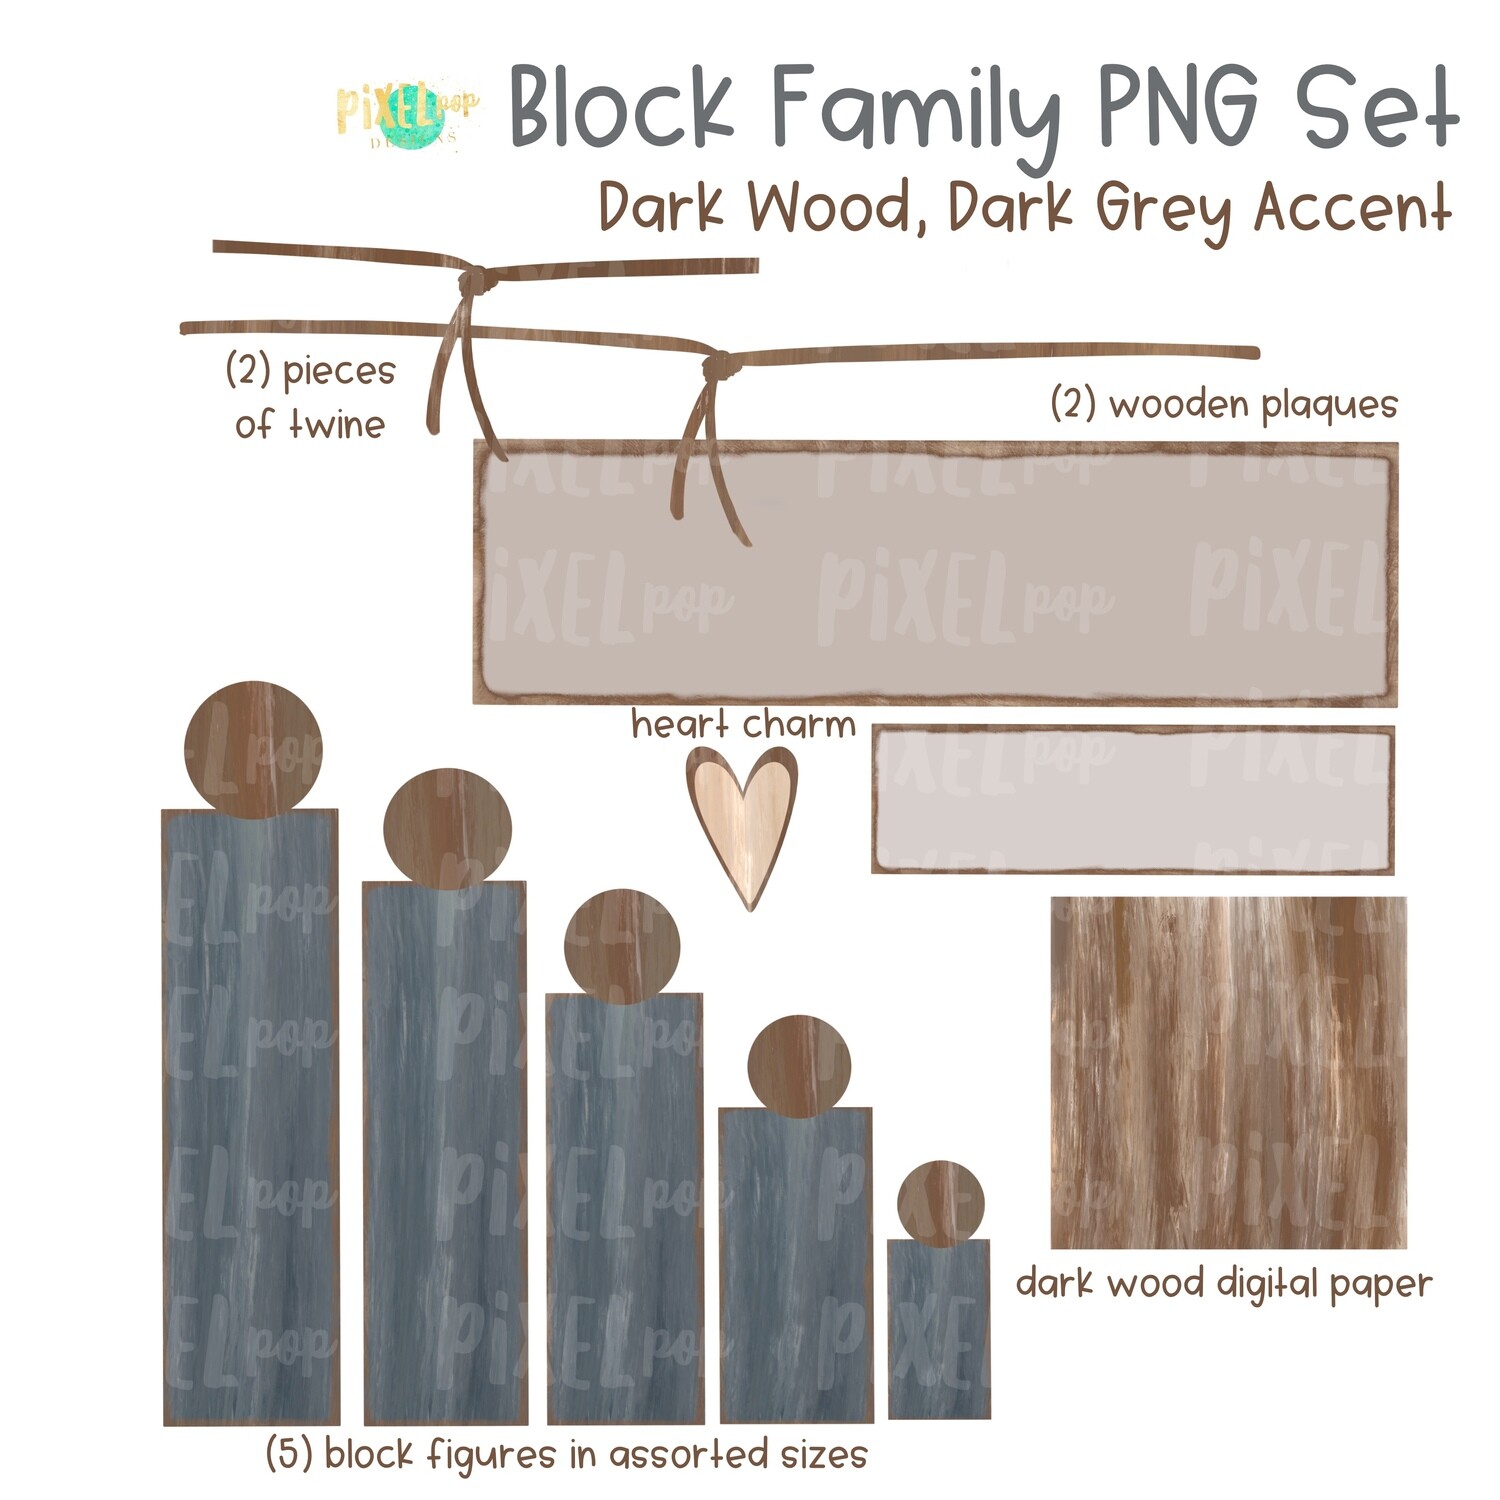 Wooden Block Family PNG Set Dark Wood Dark Grey Accents with Accessories | Family Portrait Art | Wooden Blocks | Family Design